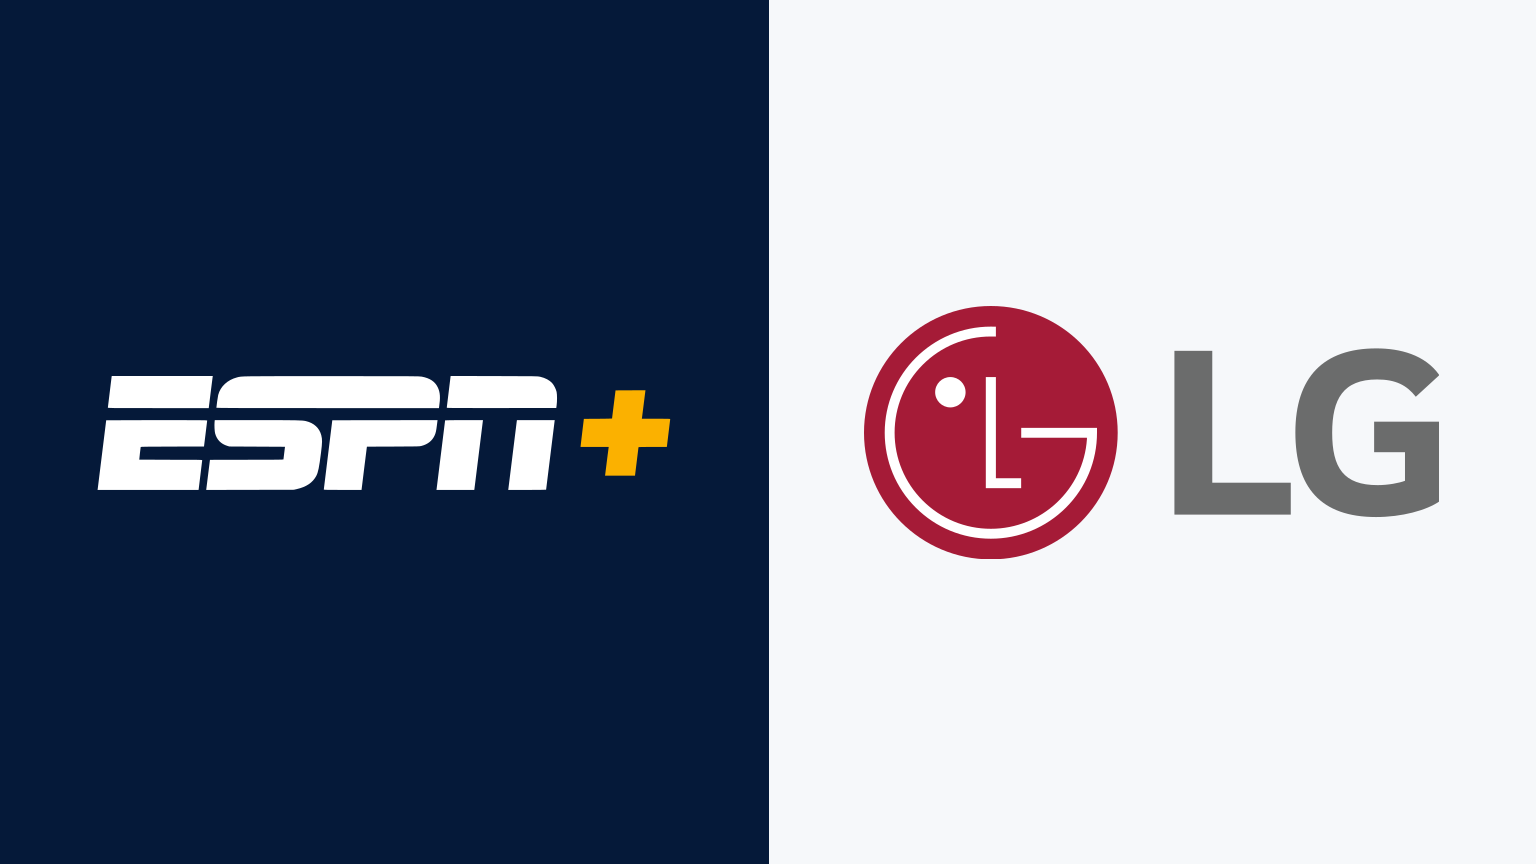 How to Watch ESPN+ on LG Smart TV